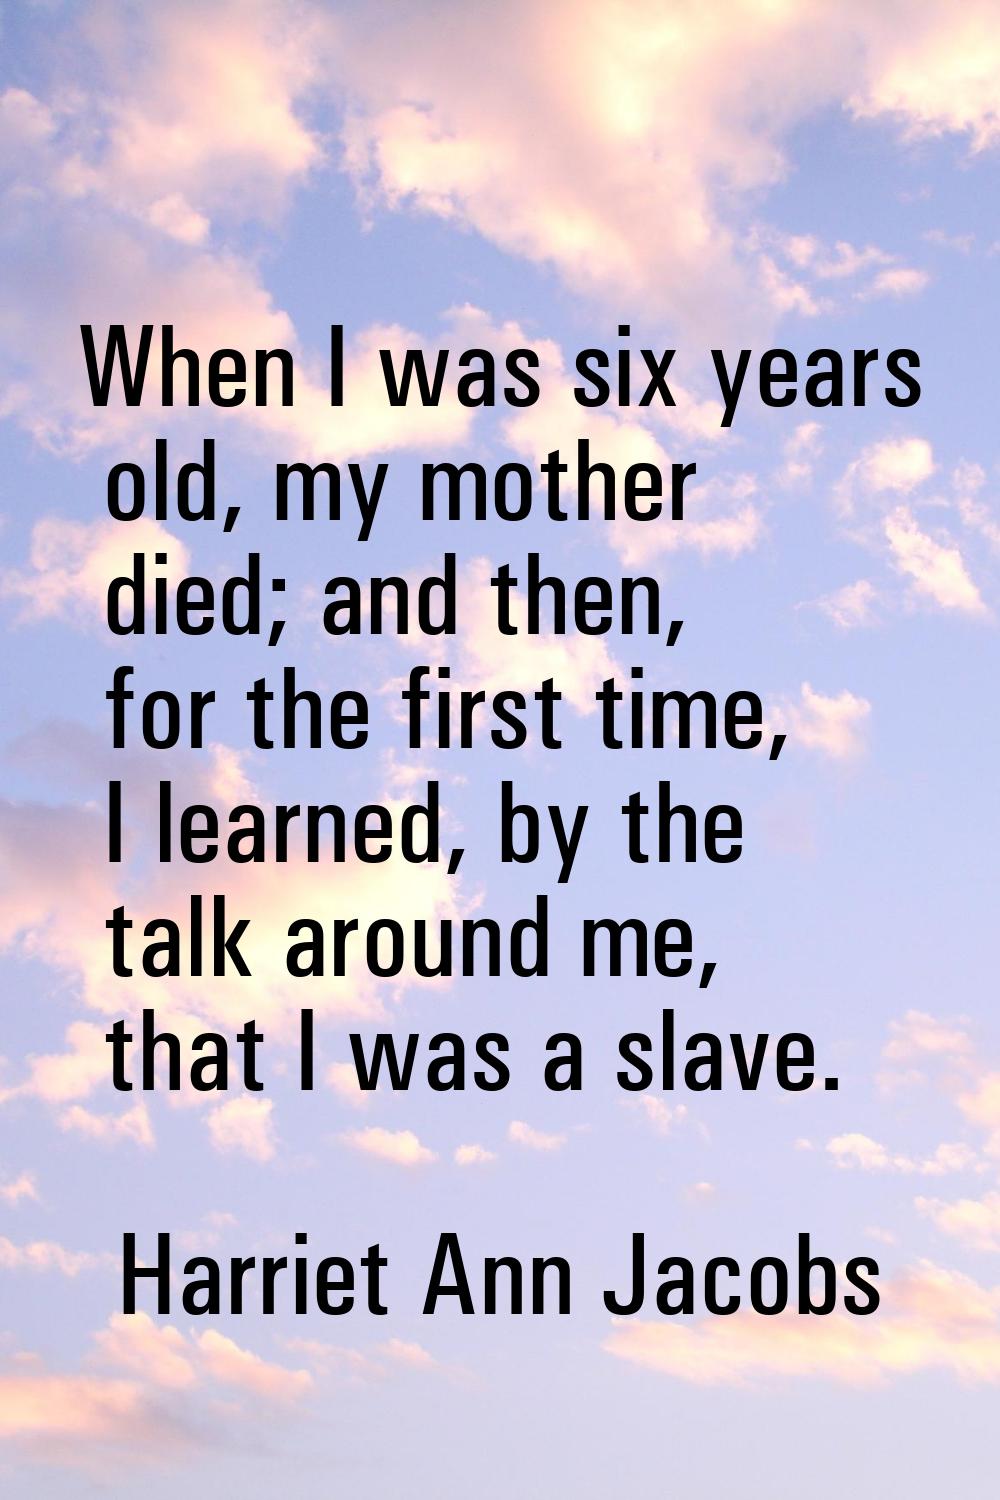 When I was six years old, my mother died; and then, for the first time, I learned, by the talk arou